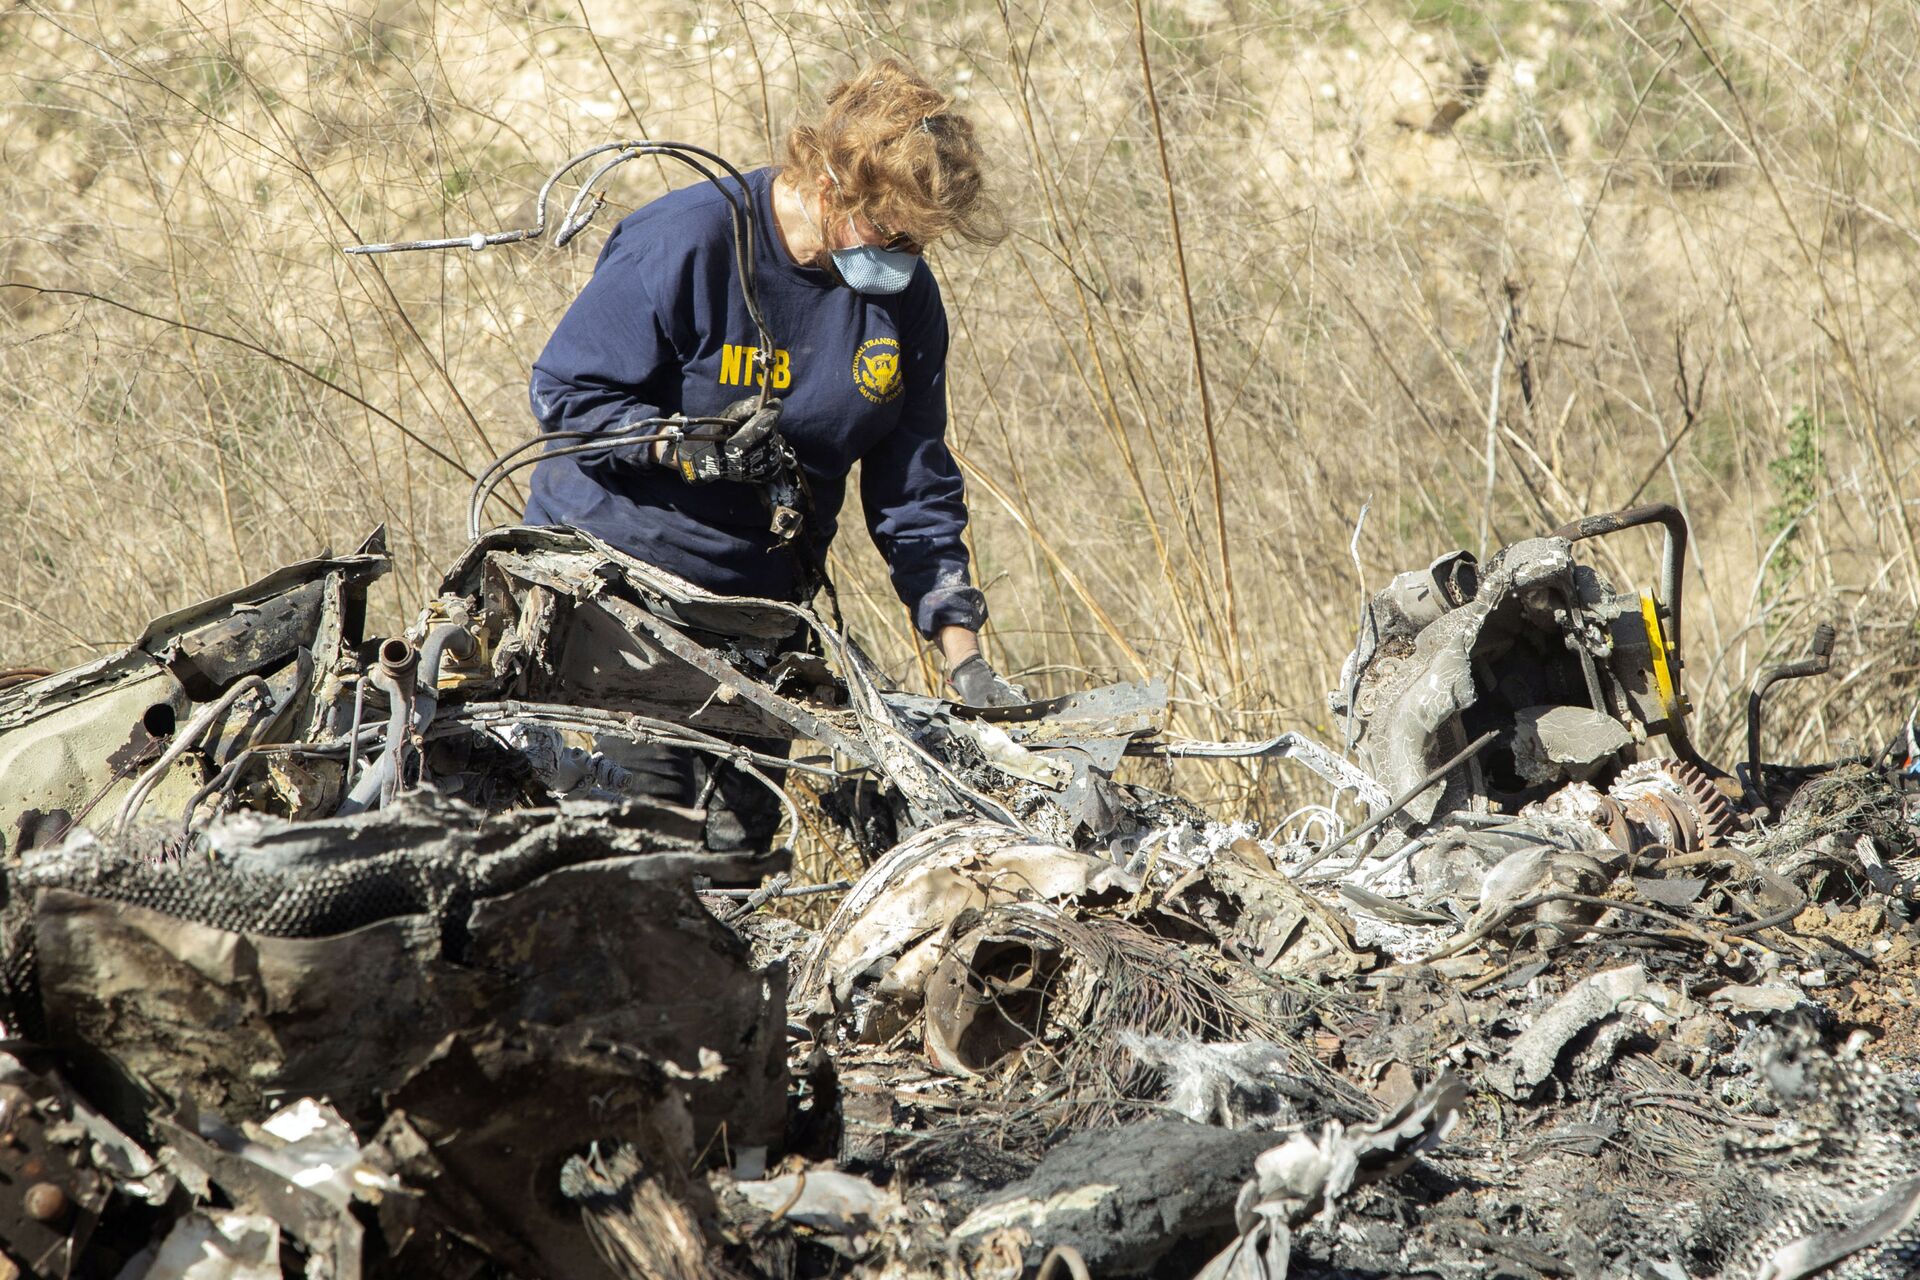 FILE - In this Jan. 27, 2020, file photo, released by the National Transportation Safety Board, NTSB investigator Carol Hogan examines wreckage as part of the NTSB's investigation of a helicopter crash near Calabasas, Calif., that killed former NBA basketball player Kobe Bryant, his 13-year-old daughter, Gianna, and seven others. Federal safety investigators bypassed aviation regulators on Tuesday, June 2, 2020, and urged leading helicopter manufacturers to install so-called black boxes that would help determine the cause of crashes such as the one that killed former NBA star Kobe Bryant. - Sputnik International, 1920, 25.08.2022